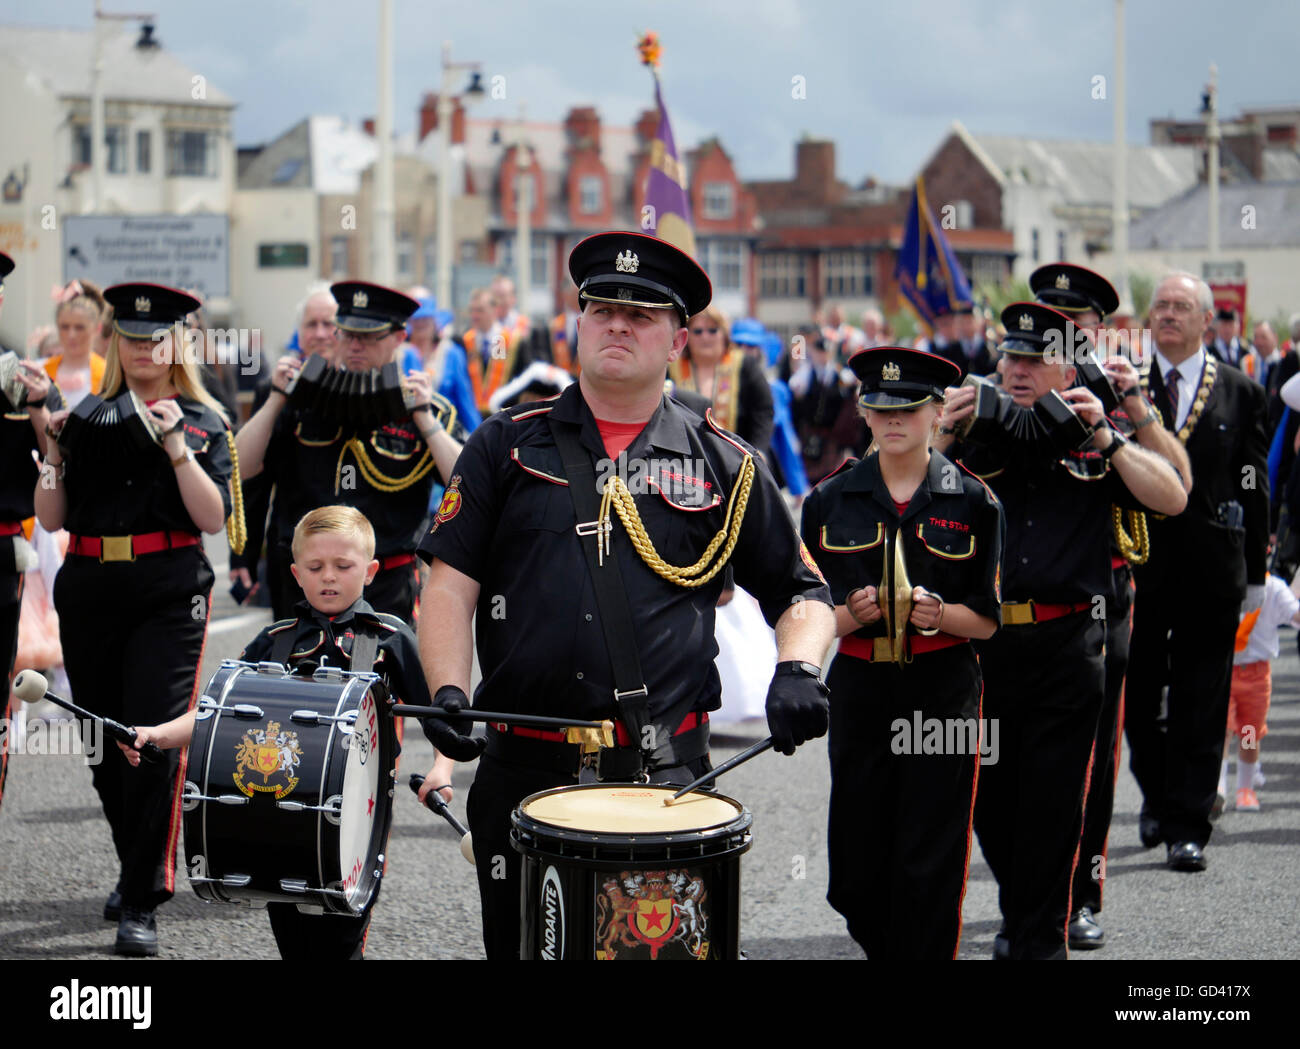 Southport, Merseyside, UK. 12th July, 2016. The Orange Lodge Parade marching through Southport. Merseyside. 12 July 2016. The parade's history goes back over three centuries to the Battle of the Boyne in 1690 when King William III of Orange defeated his rival King James II.This year's walk is also in memory of the 100th anniversary of the Battle of the Somme. Credit:  ALAN EDWARDS/Alamy Live News Stock Photo